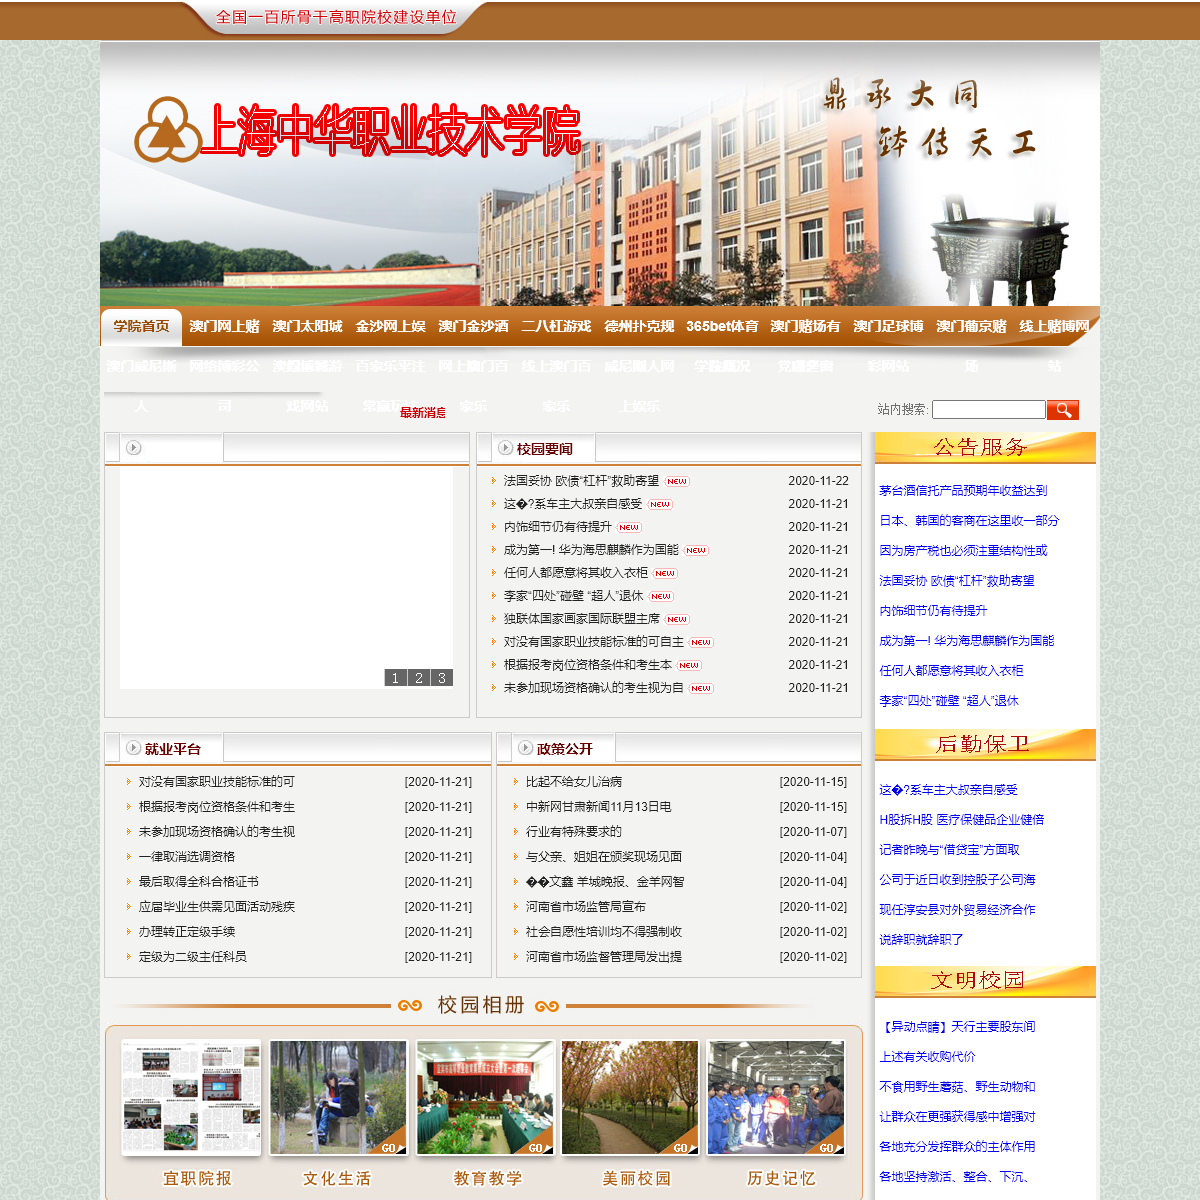 A complete backup of zhonghuacollege.com